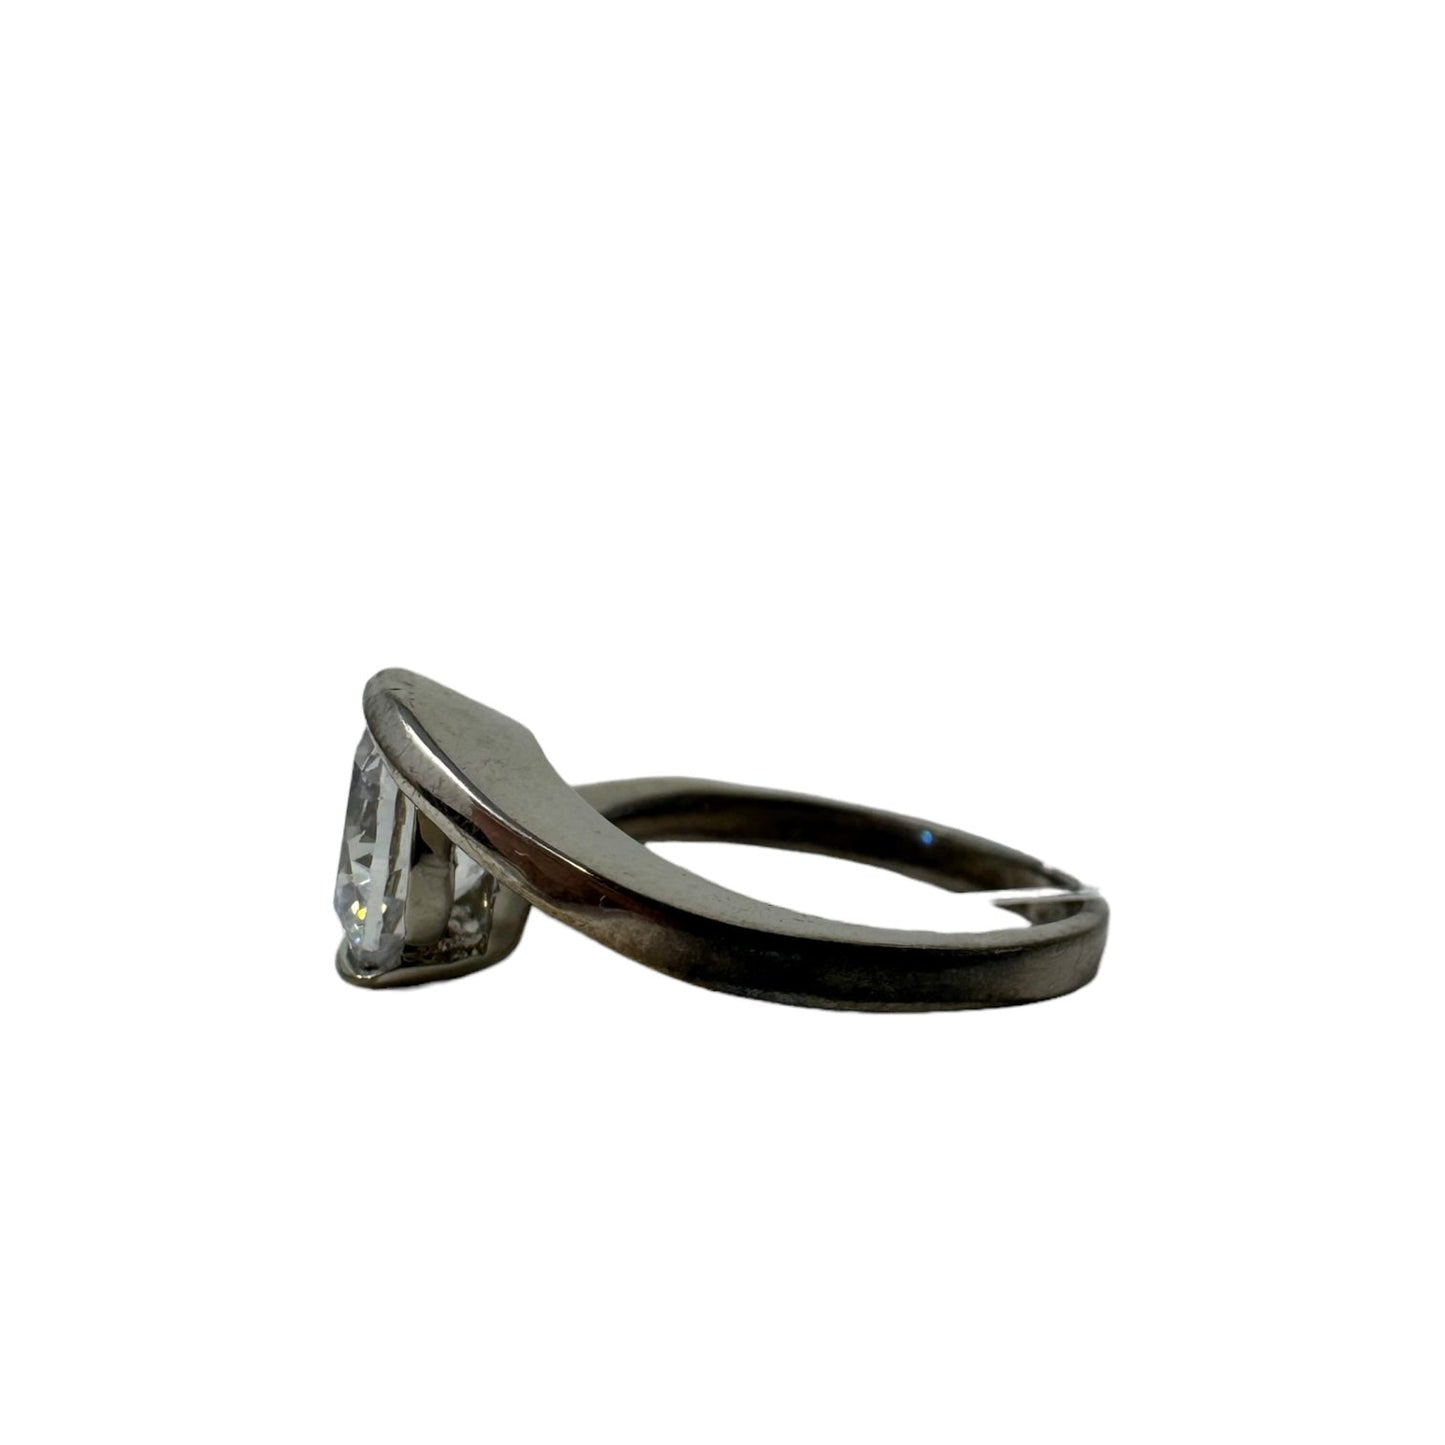 Bypass Solitaire Ring By Unknown Brand Size: 8